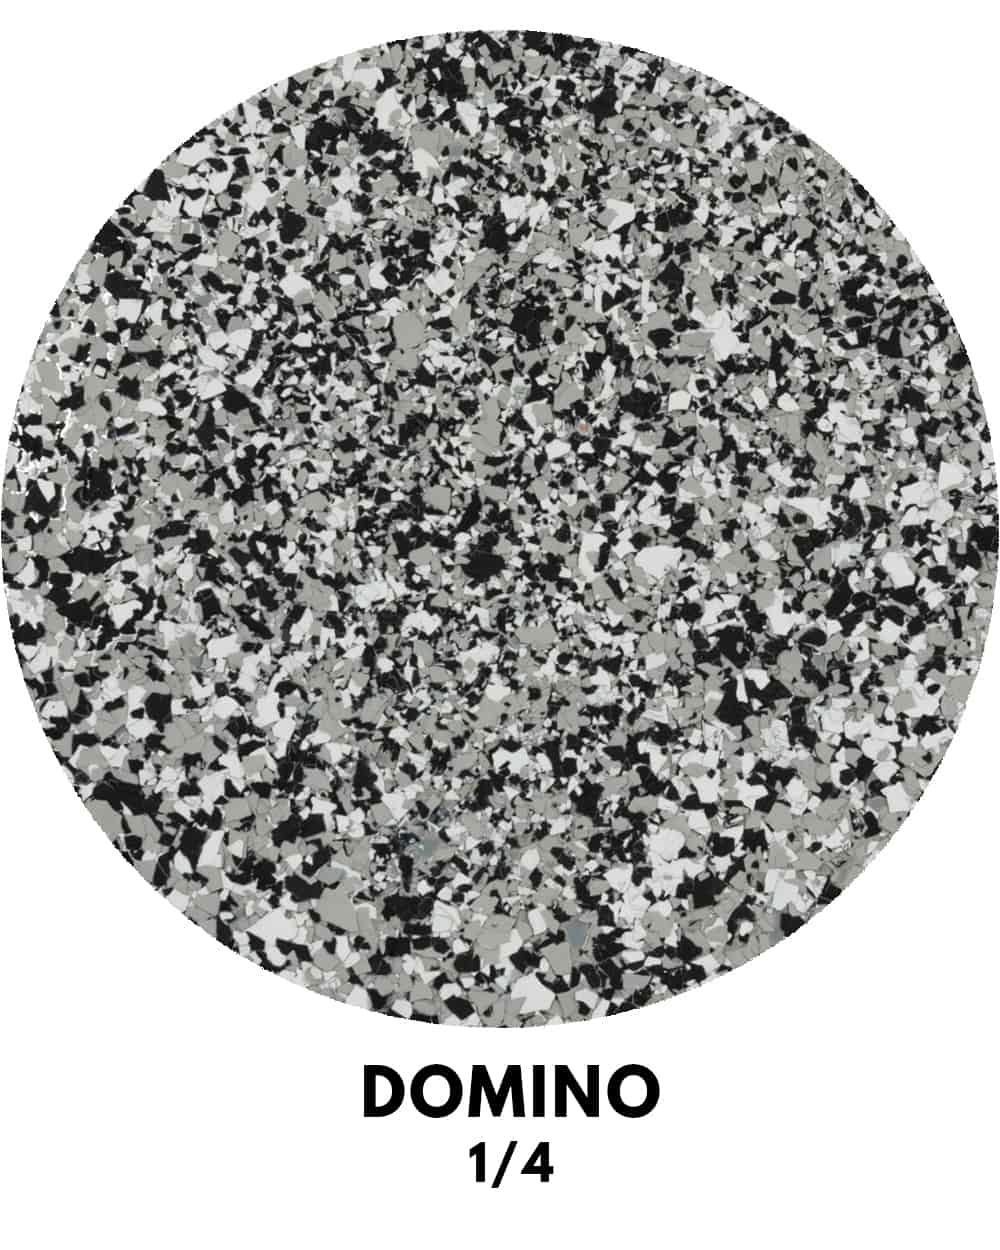 DF Domino 1/4 Flakes – 25 lbs